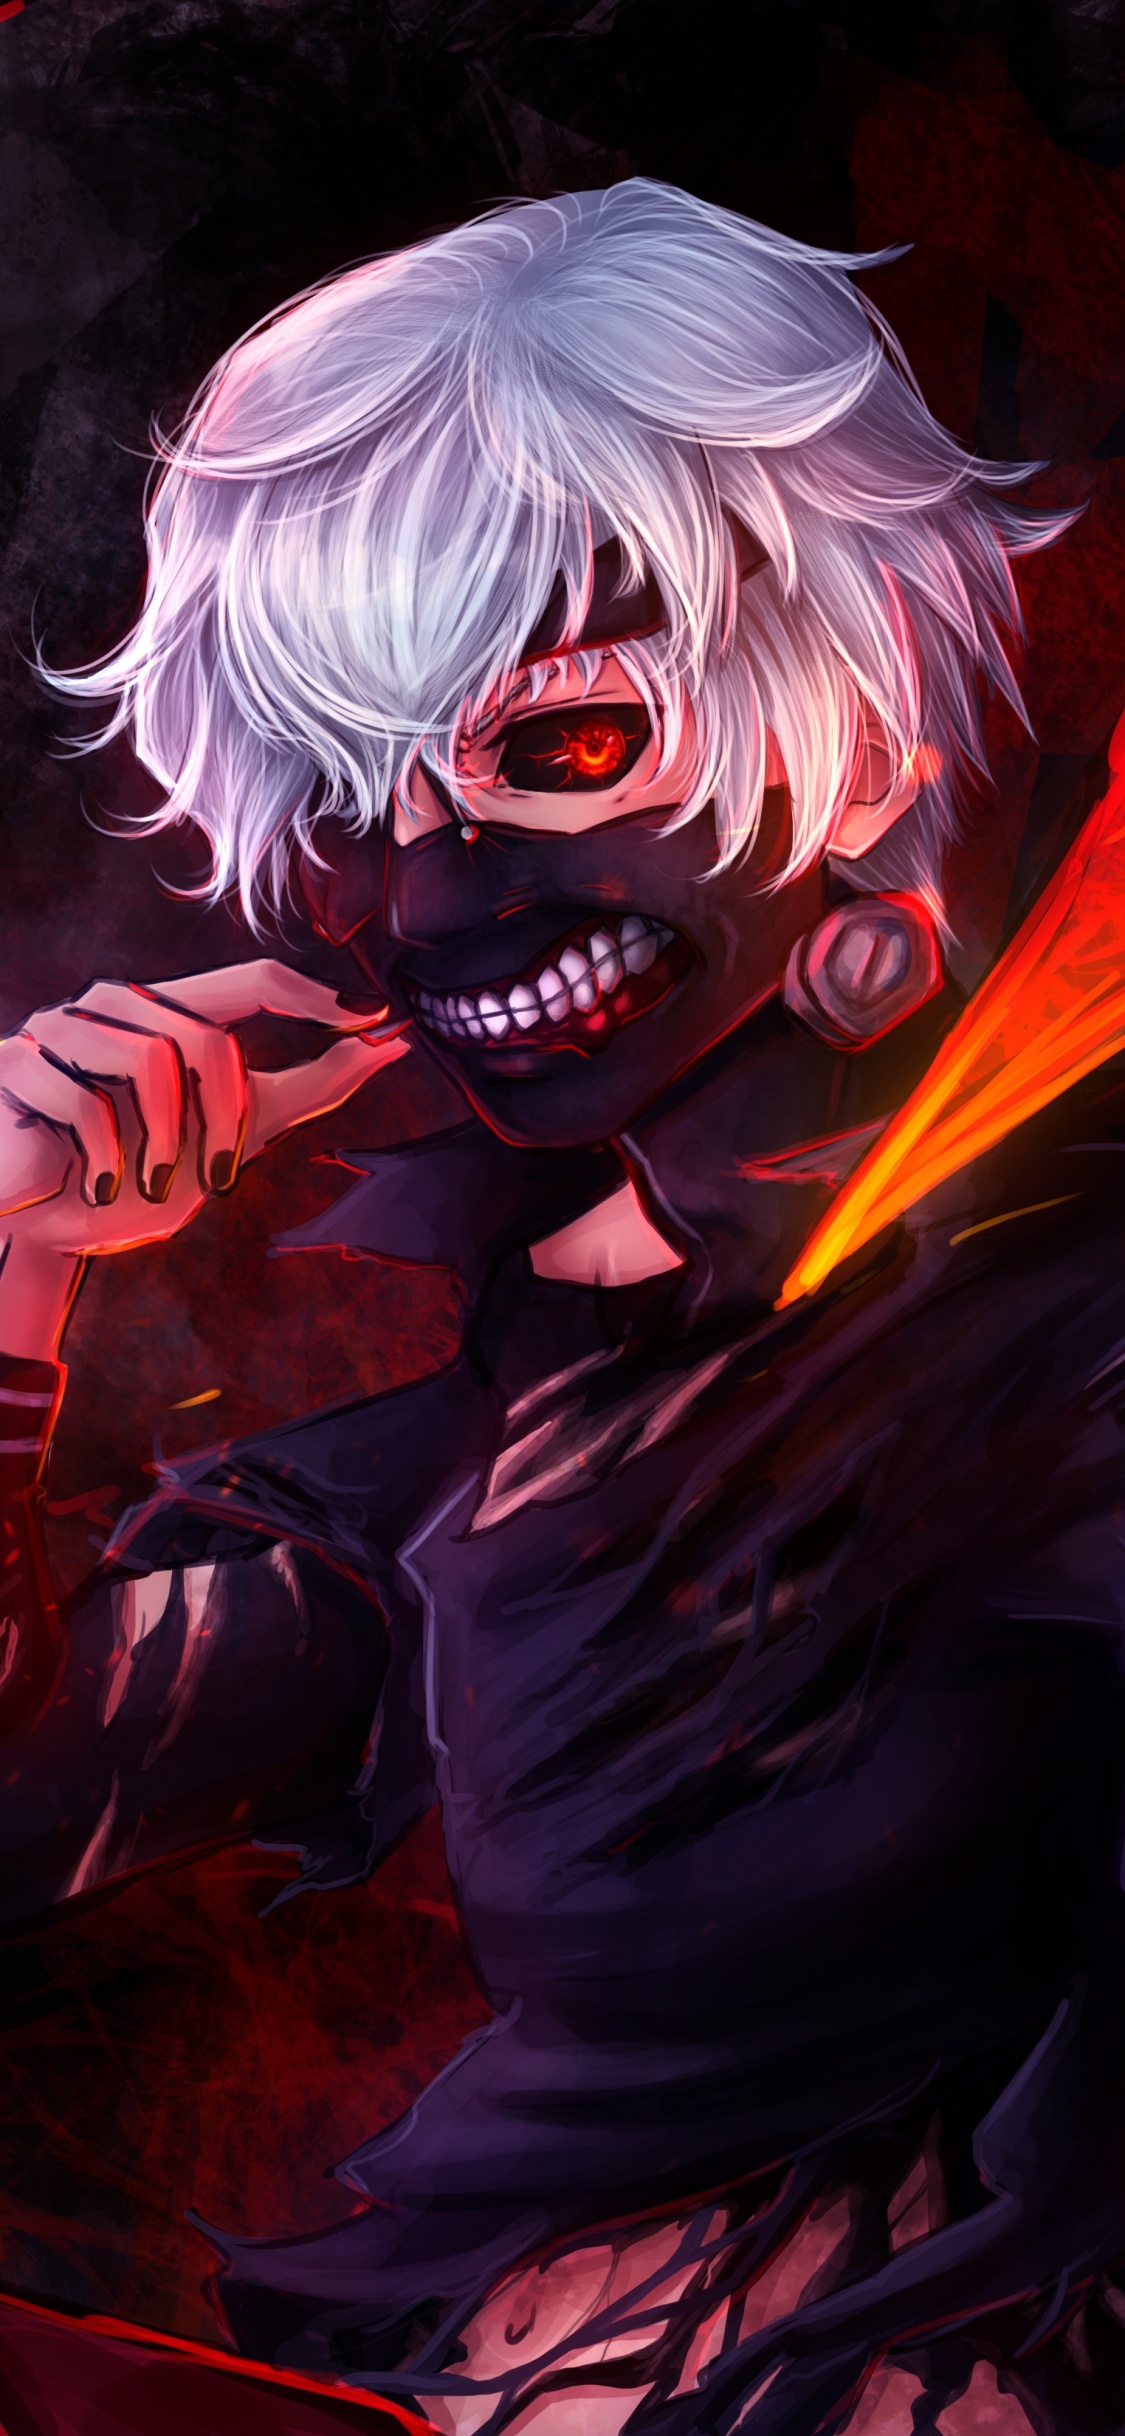 Man in Black and Red Suit Anime Character. Wallpaper in 1125x2436 Resolution